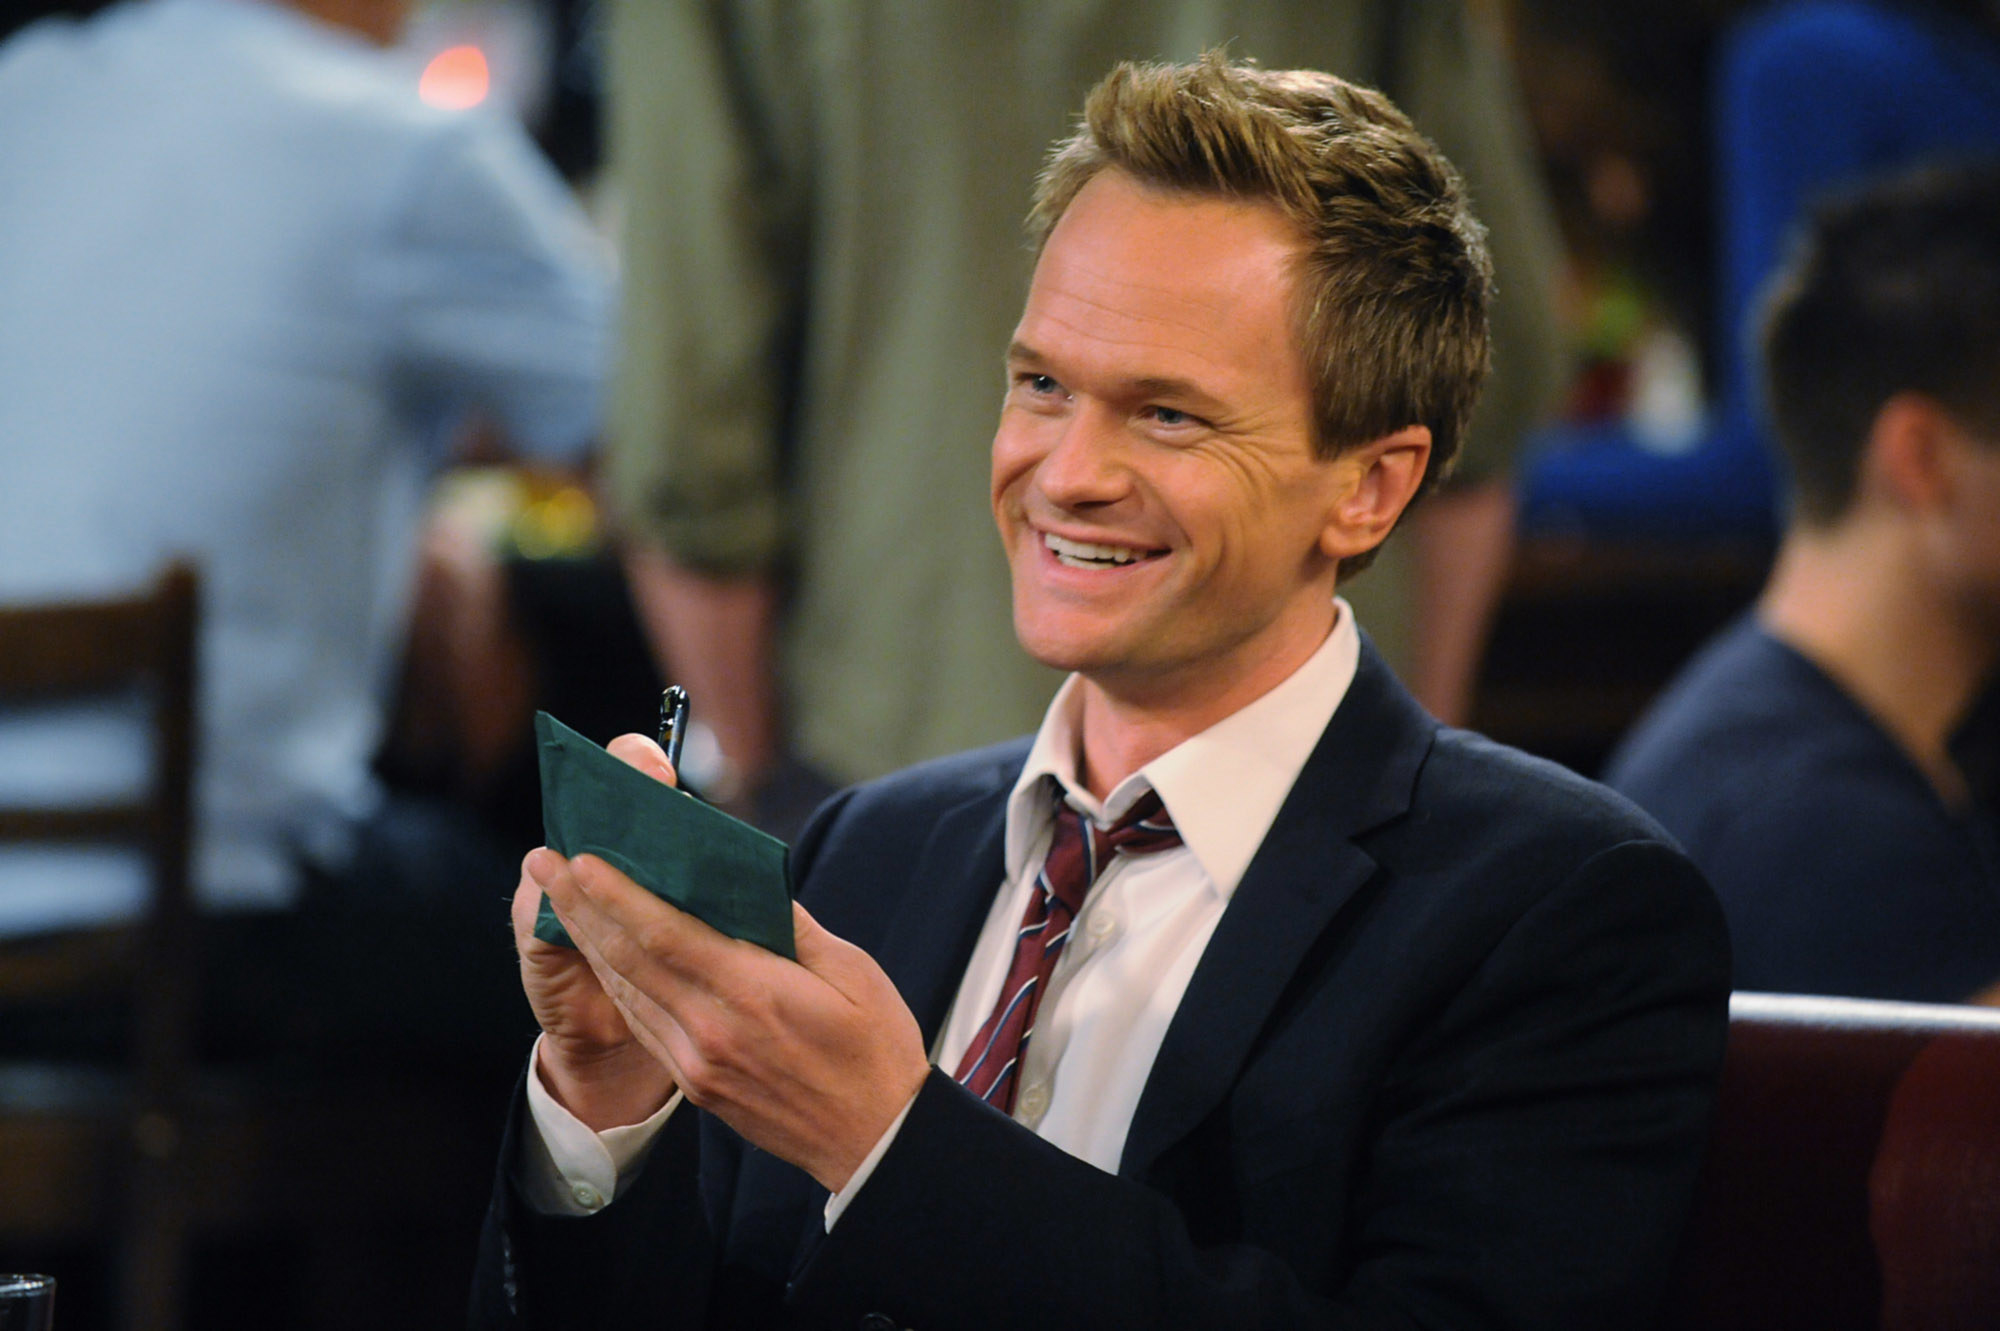 Barney sits in a bar and holds out a checkbook to write in